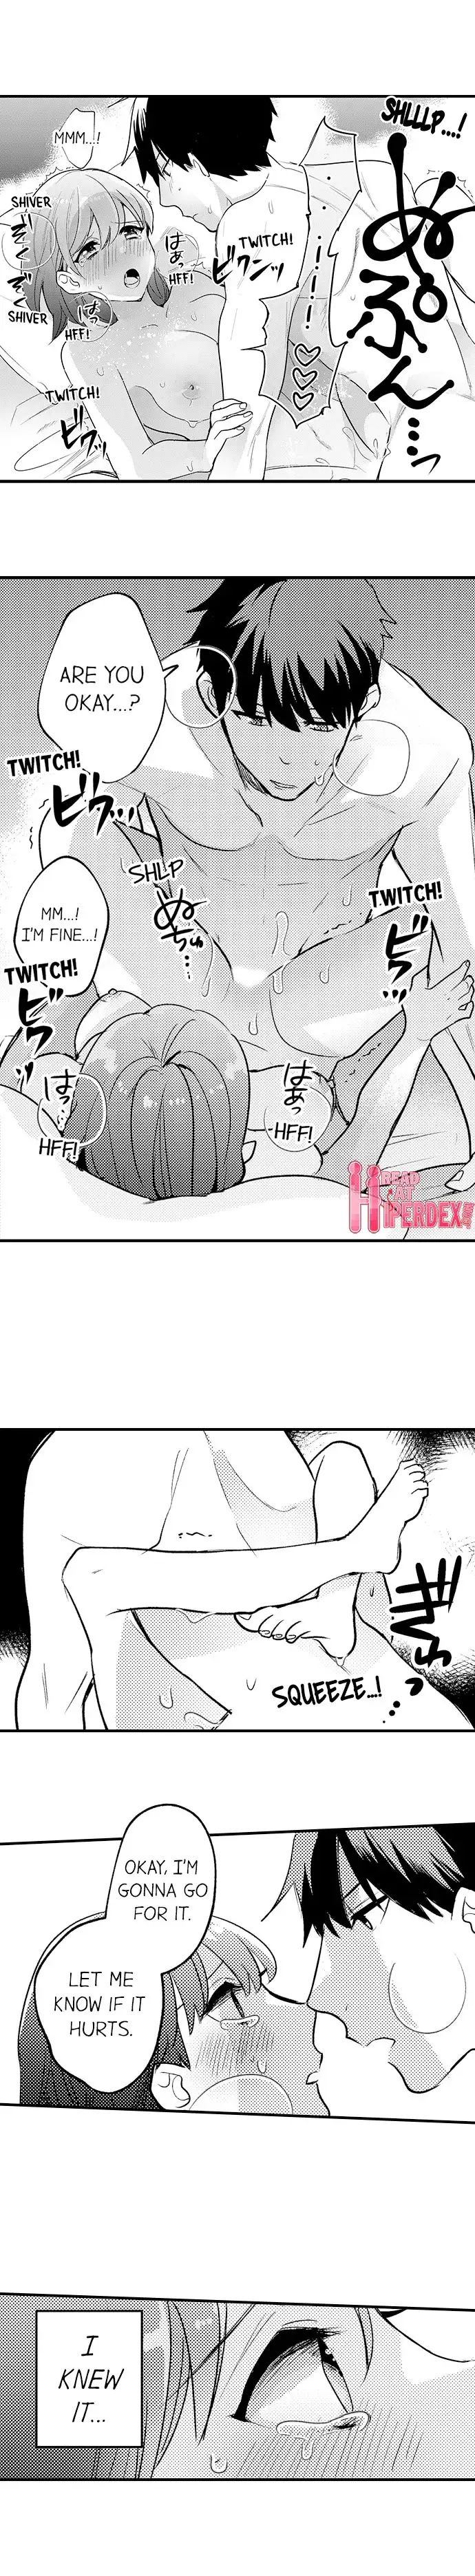 3 Hours + Love Hotel = You’re Mine - Chapter 12 Page 6